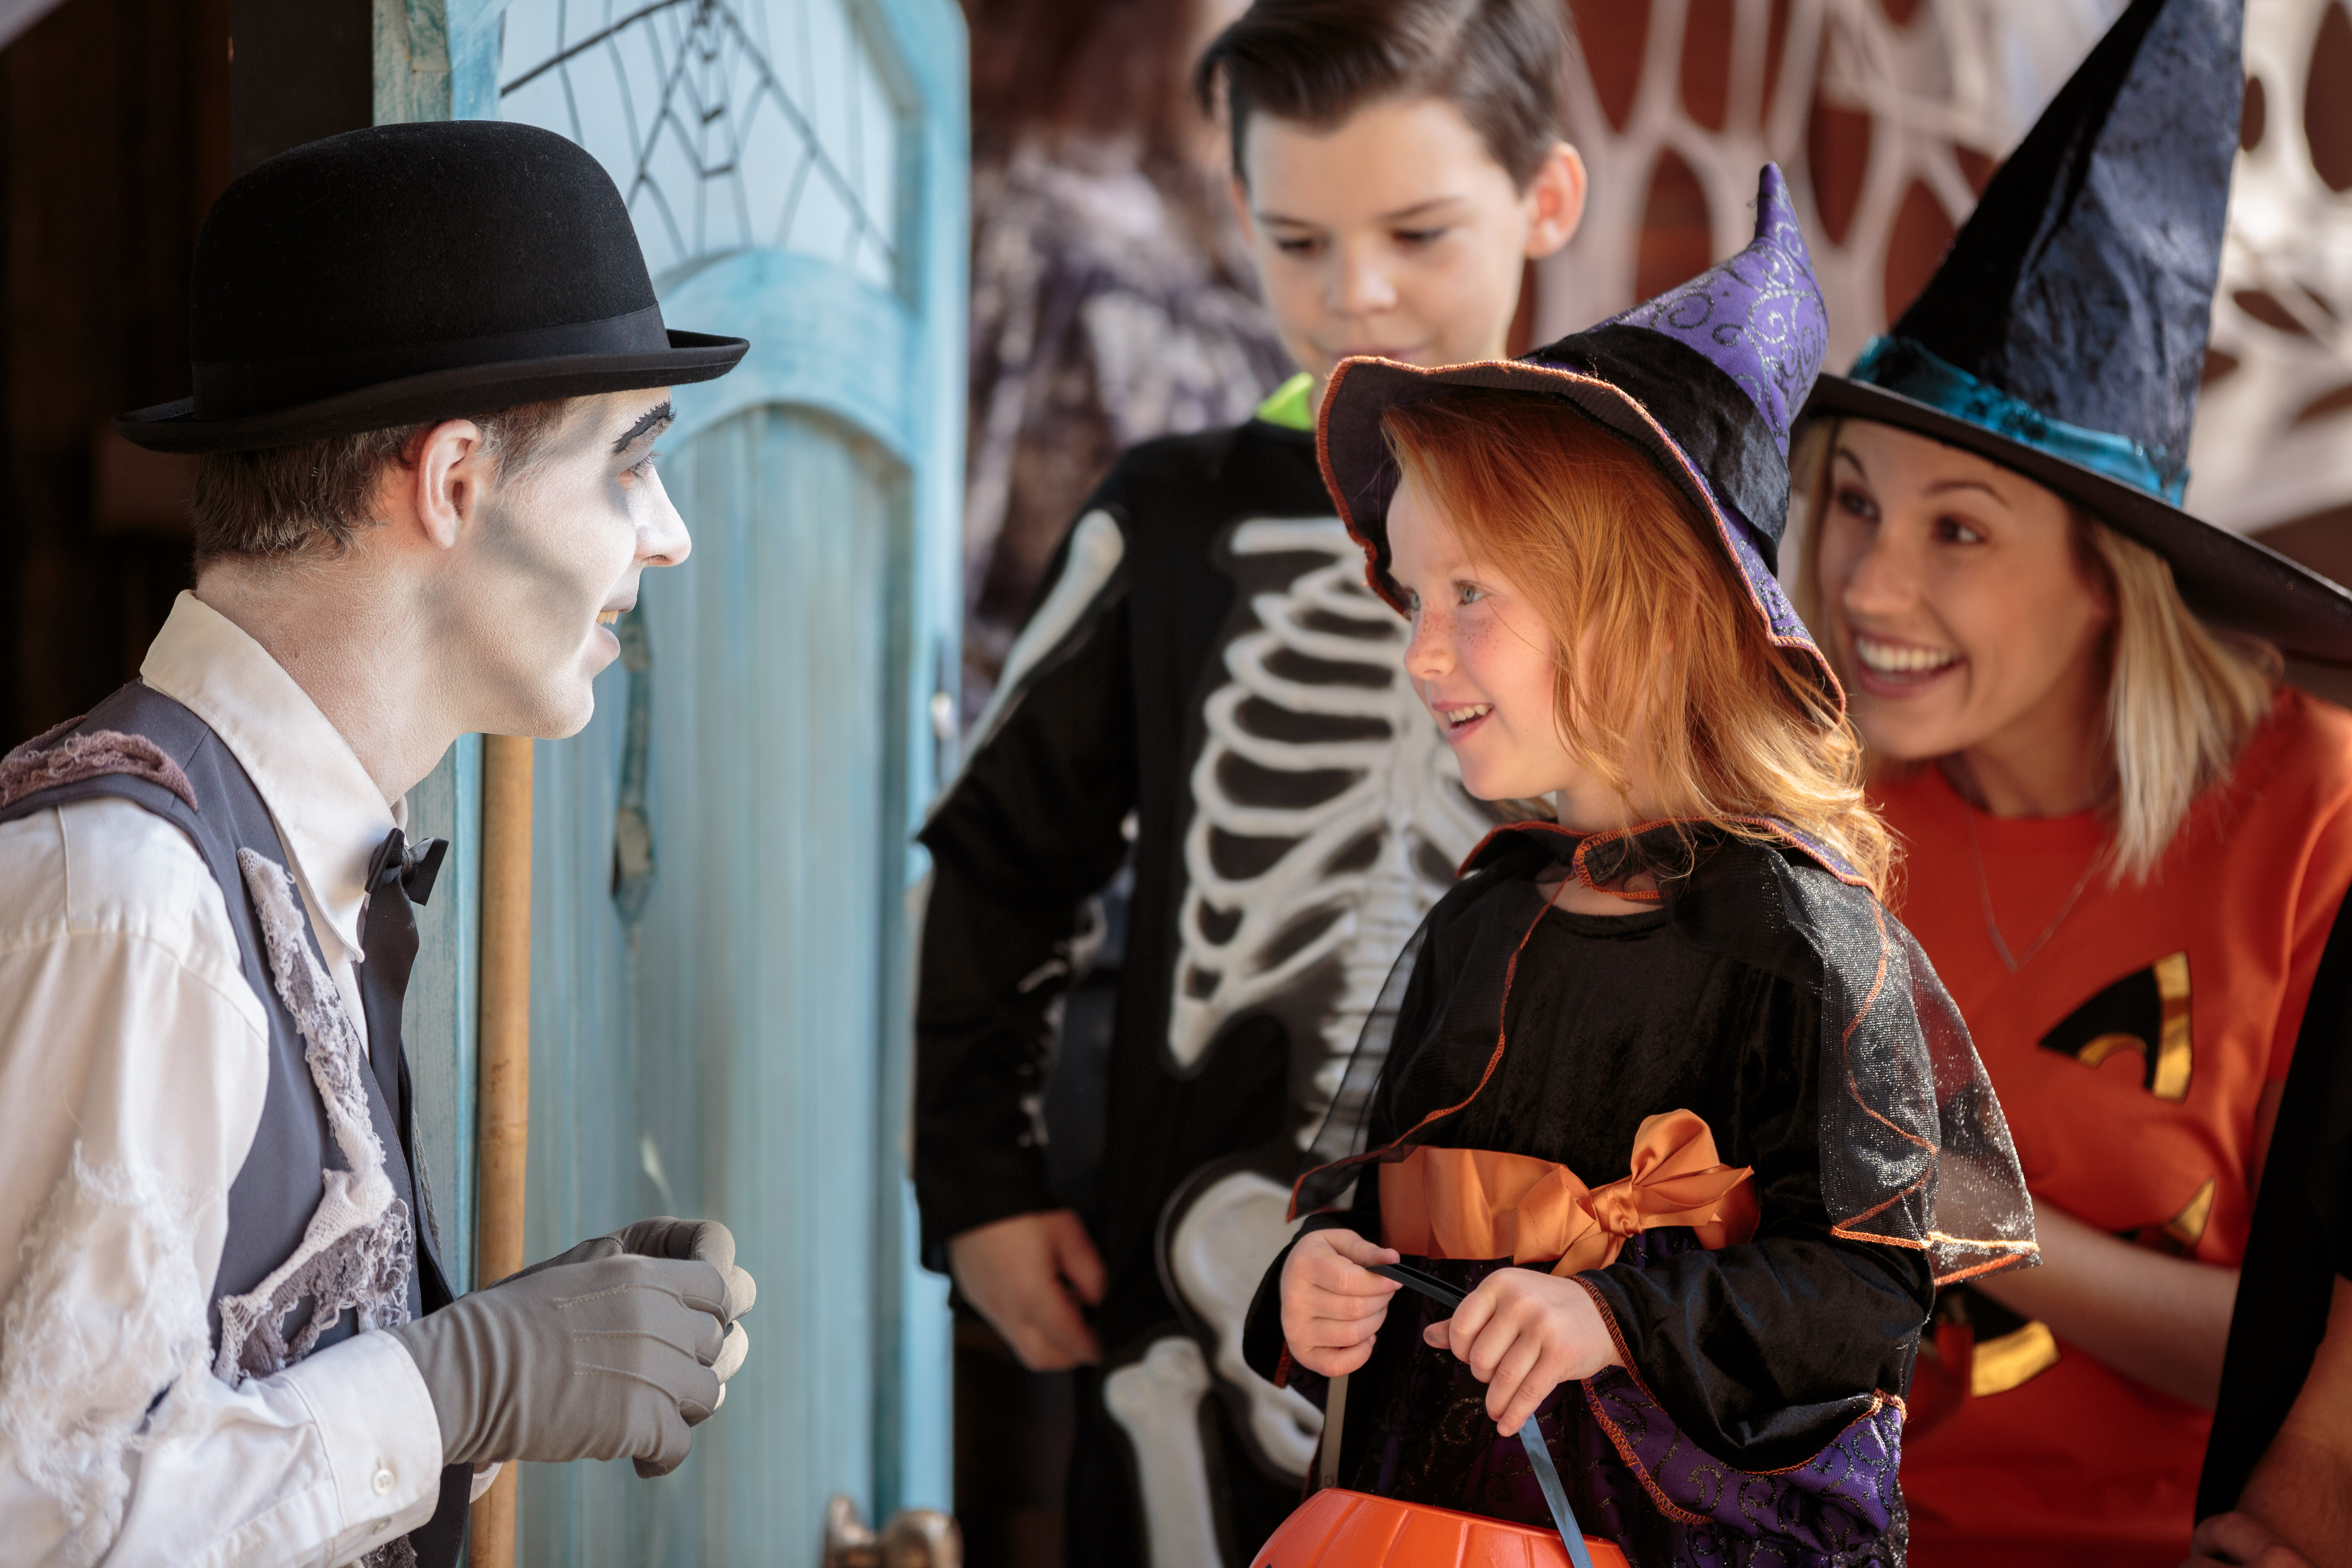 Children can participate in a trick-or-treat adventure at Camp Spooky where they'll meet some friendly Halloween characters.